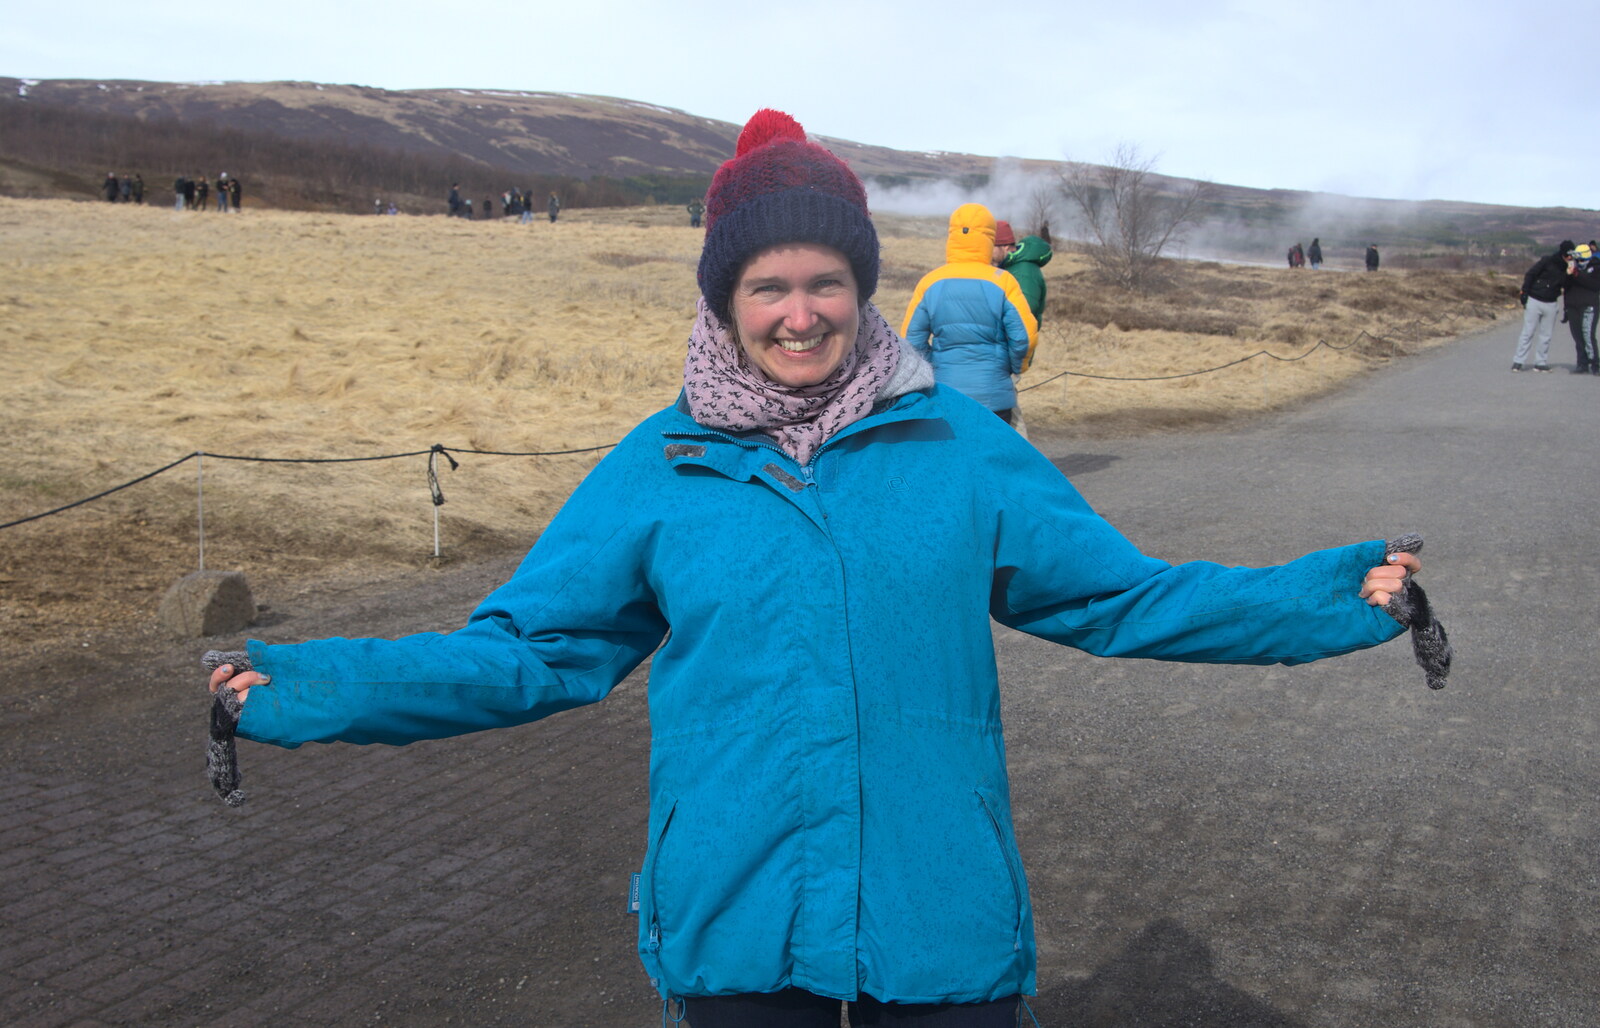 Isobel has been 'geysered' from The Golden Circle of Ísland, Iceland - 22nd April 2017